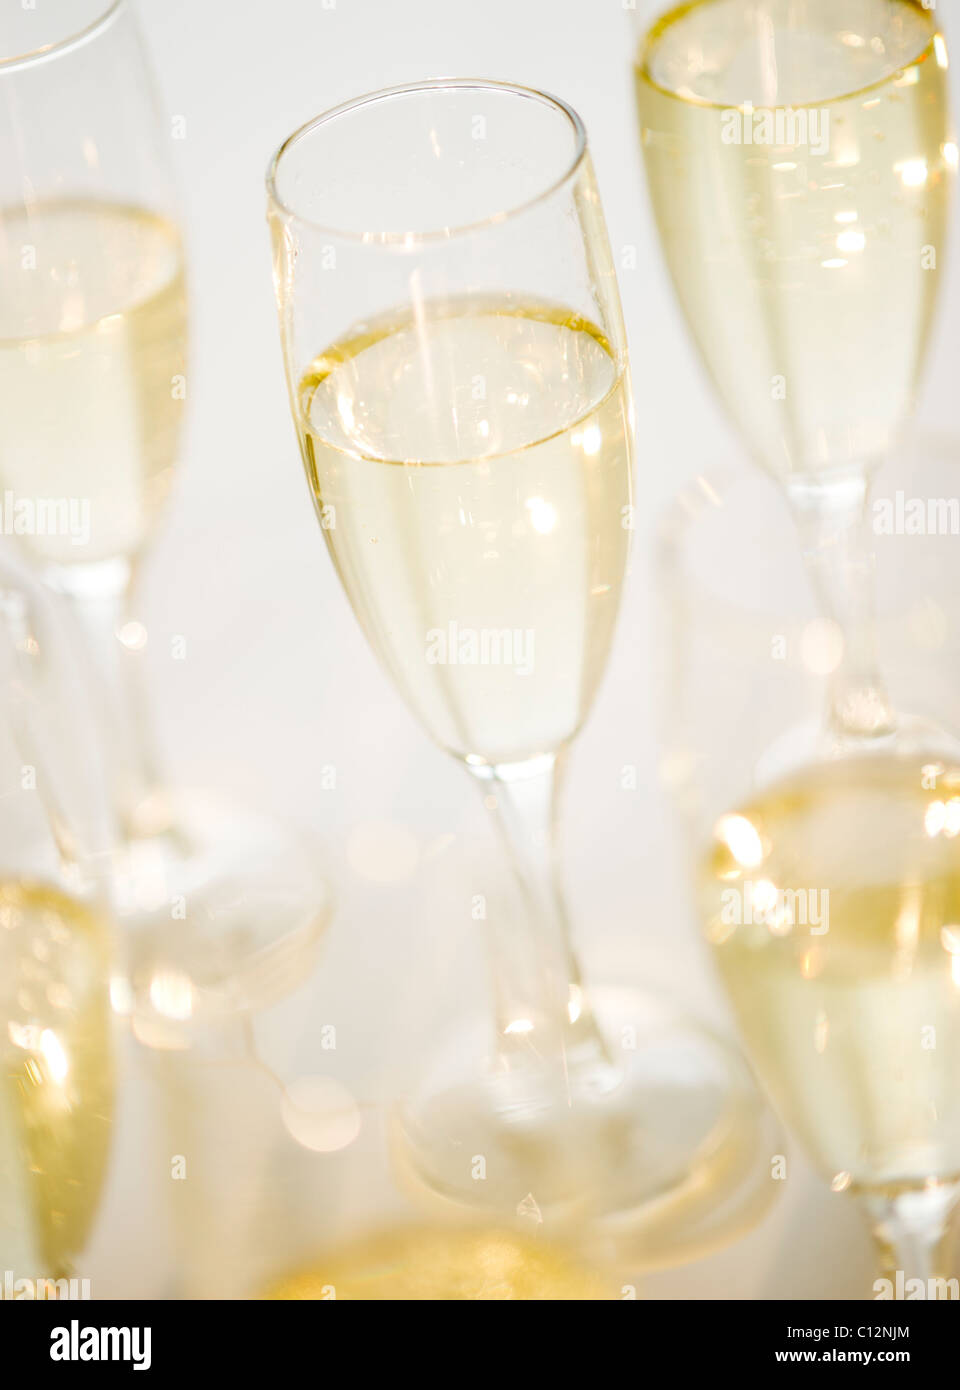 USA, New Jersey, Jersey City, Close up of champagne flutes Banque D'Images